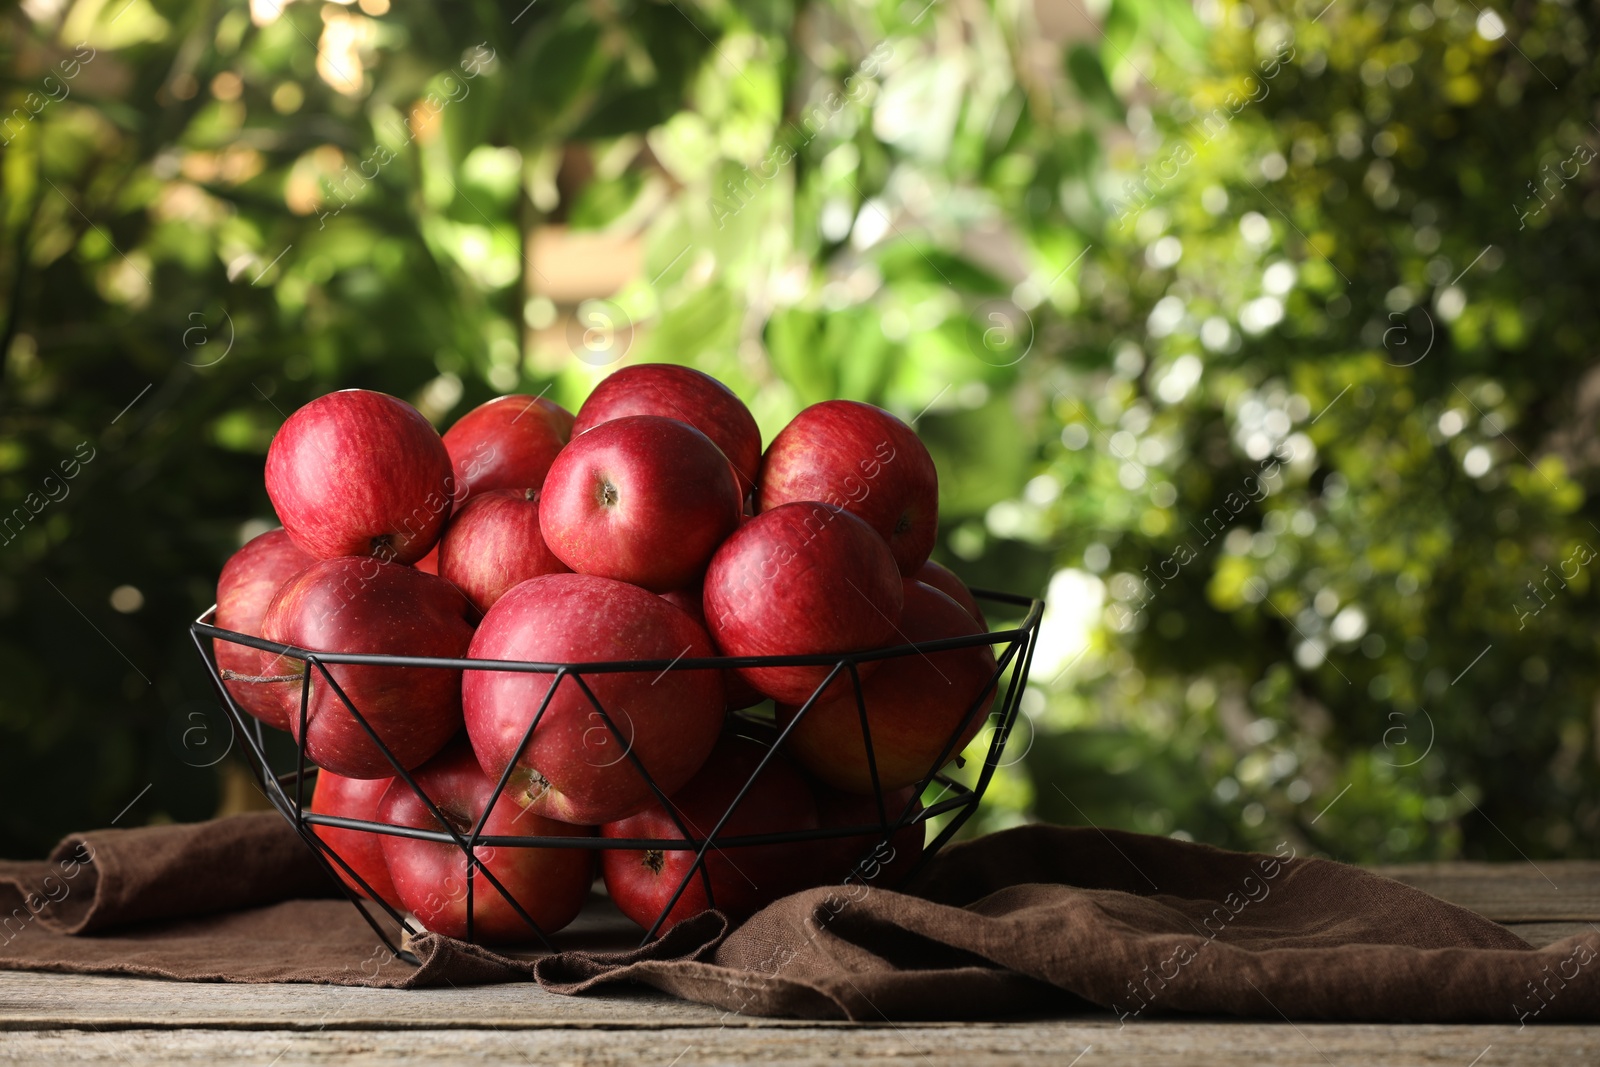 Photo of Ripe red apples in bowl on wooden table outdoors, space for text